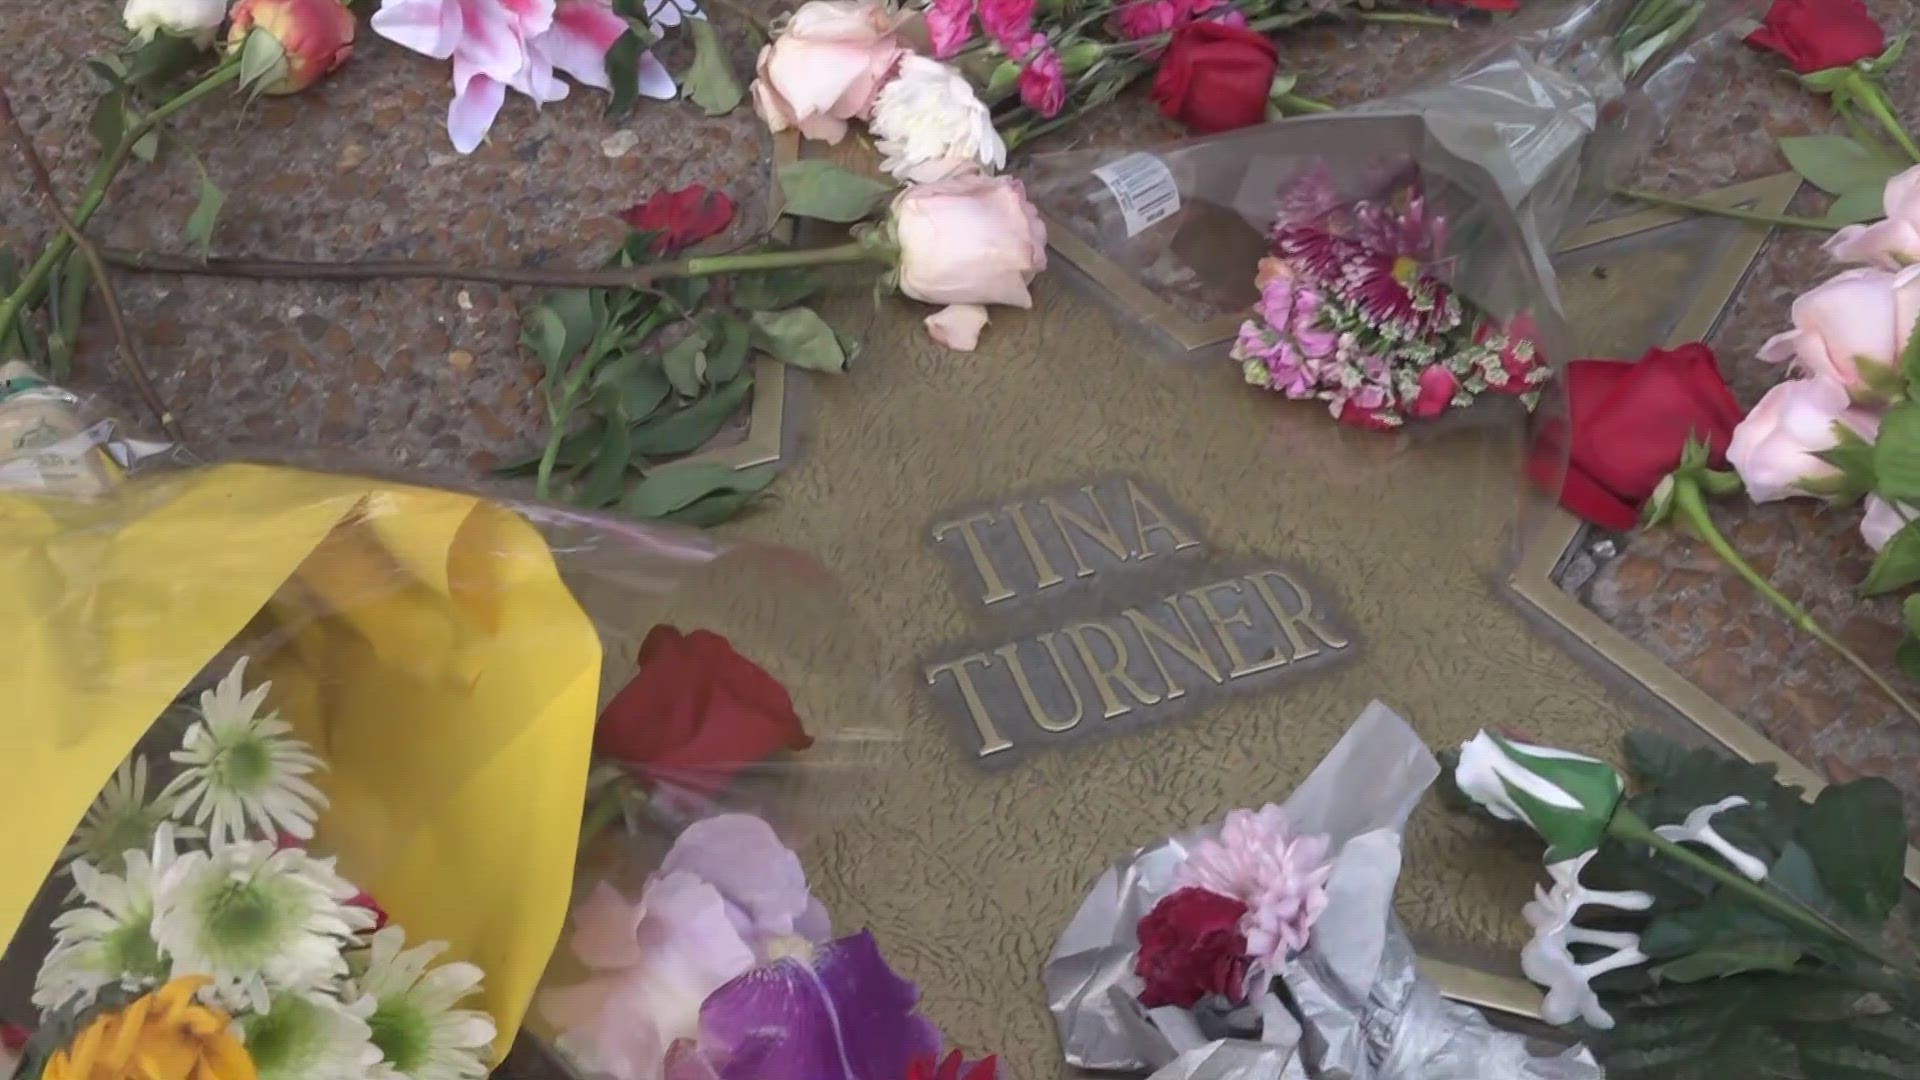 St. Louis is shaken by the death of Tina Turner. Many have placed flowers at the queen of rock and roll's start on the St. Louis Walk of Fame.